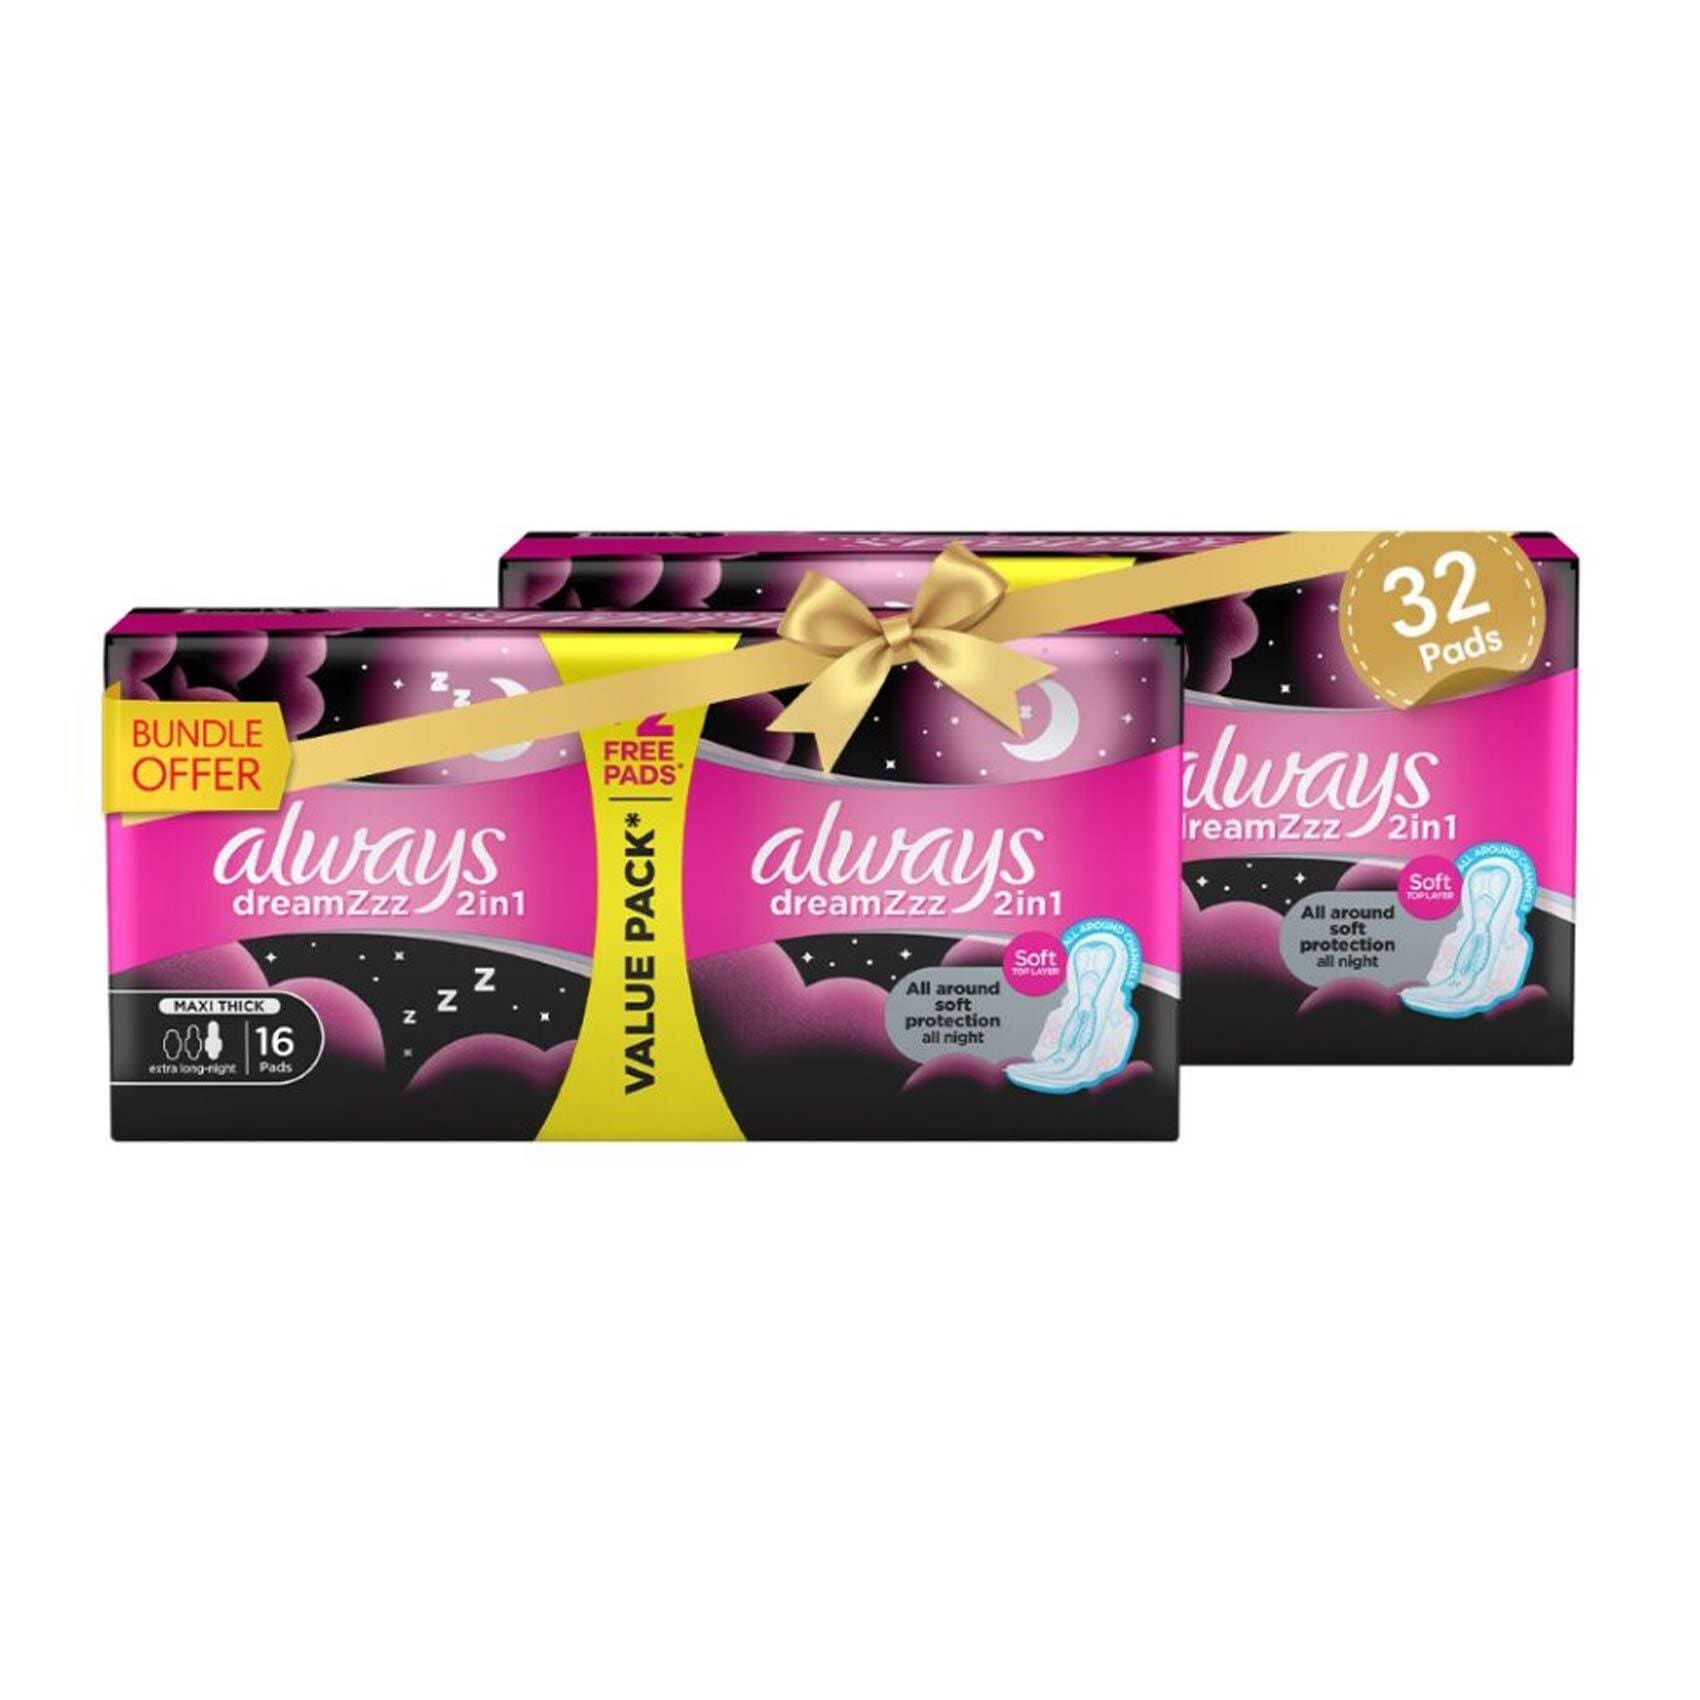 Buy Always Pads Online - Carrefour